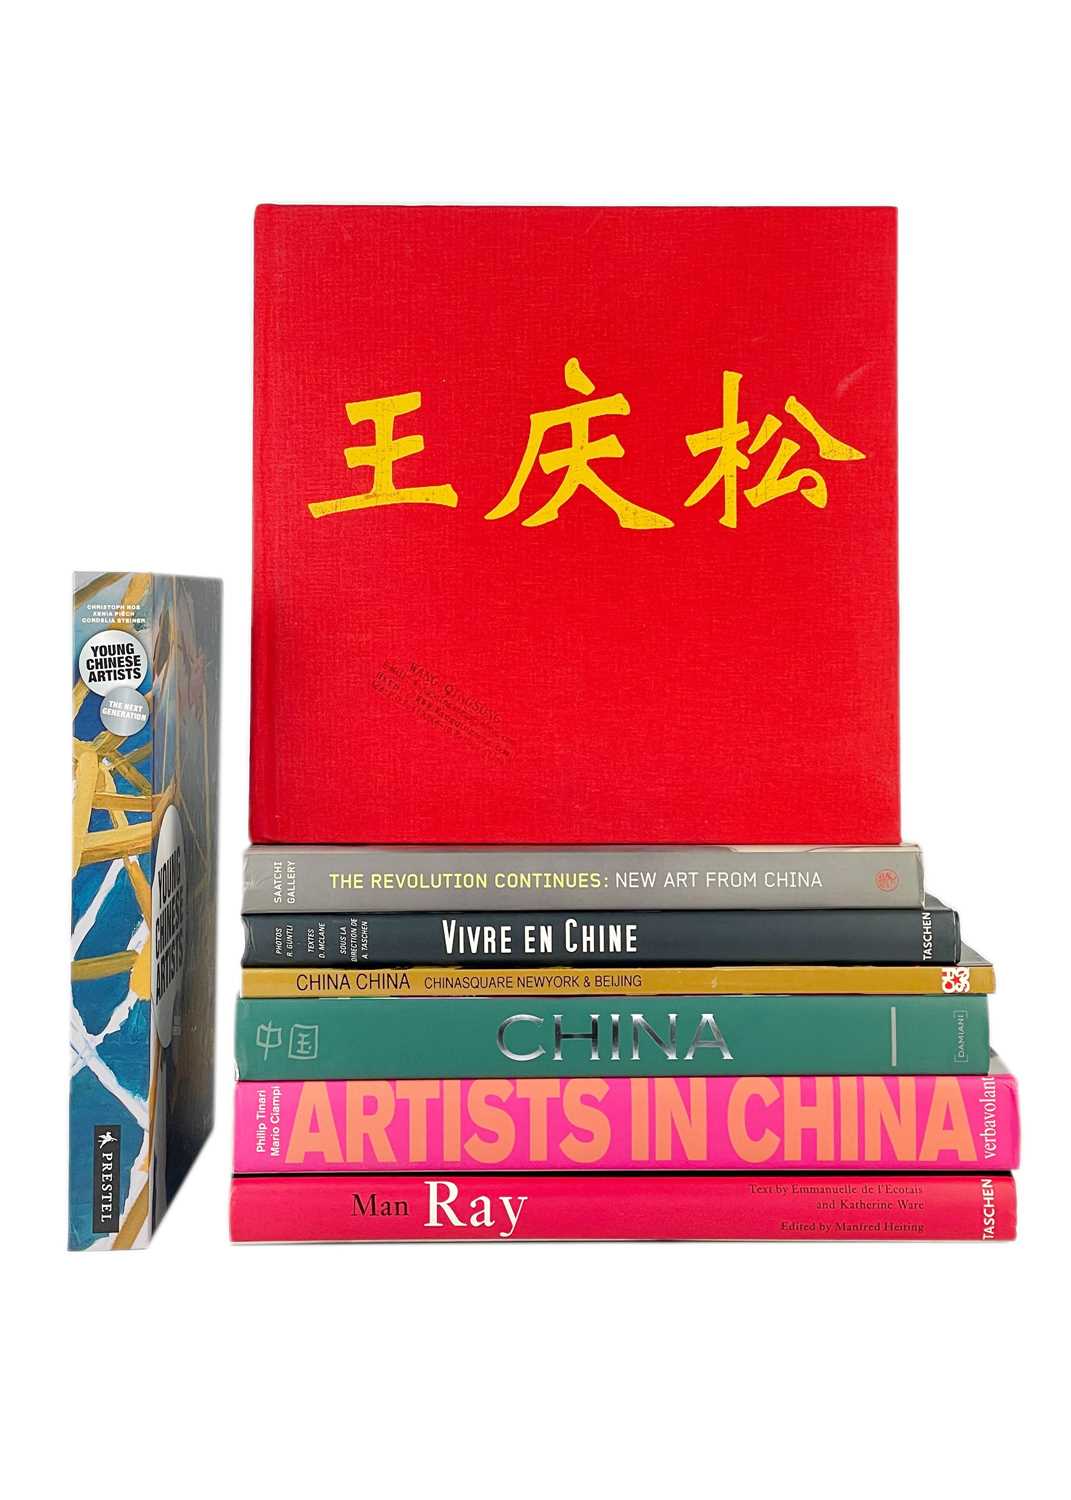 Eight books relating to China and Contemporary Chinese Art.